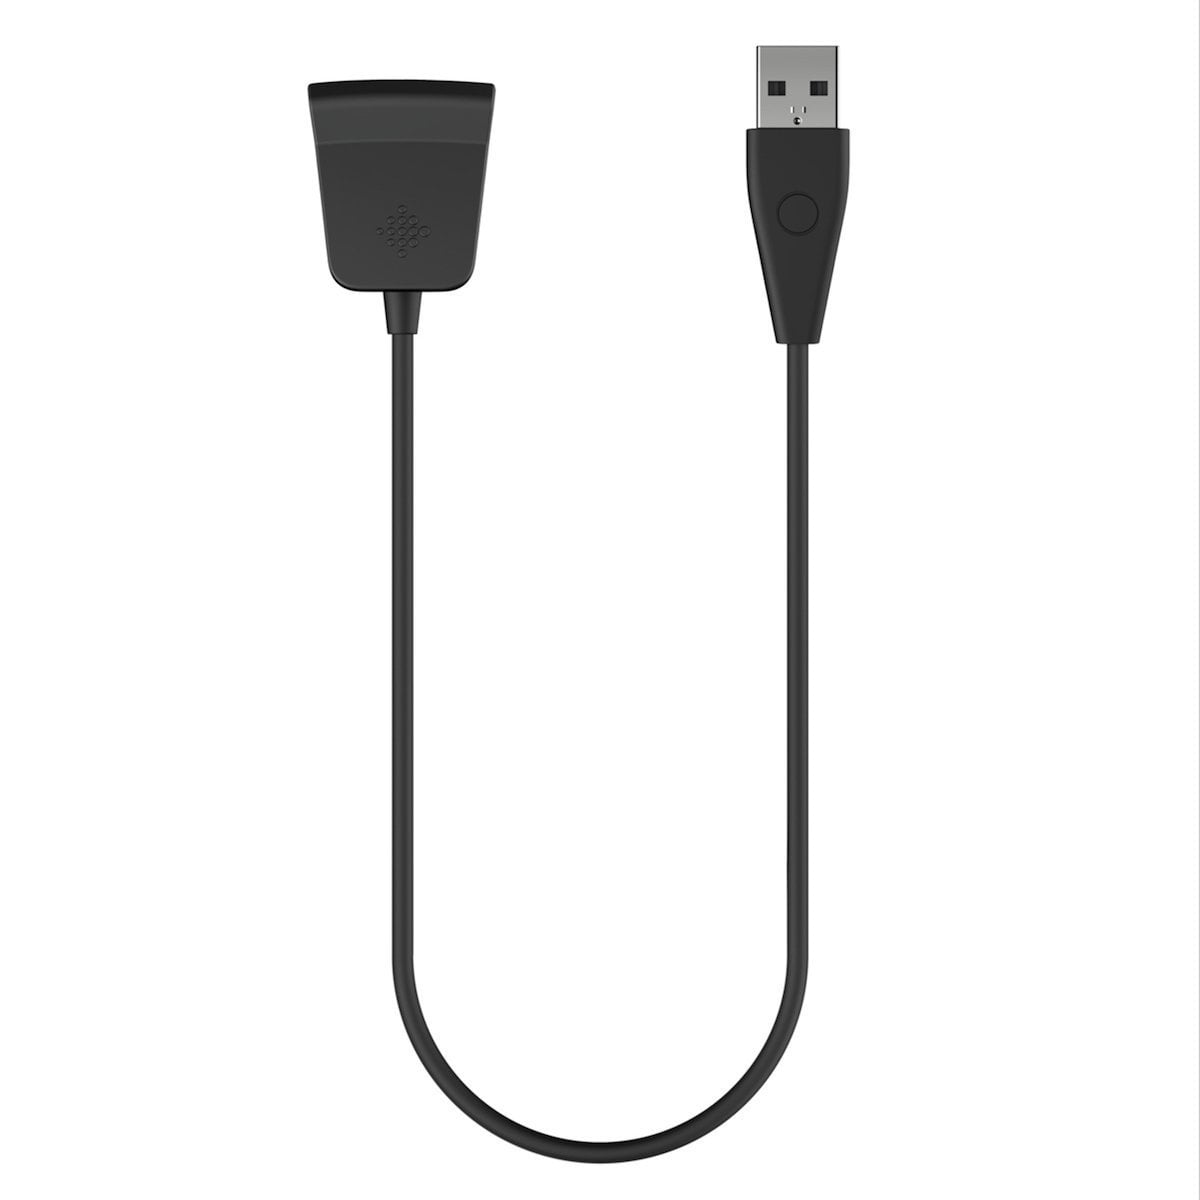 Fitbit Charging Cable - Walmart.com